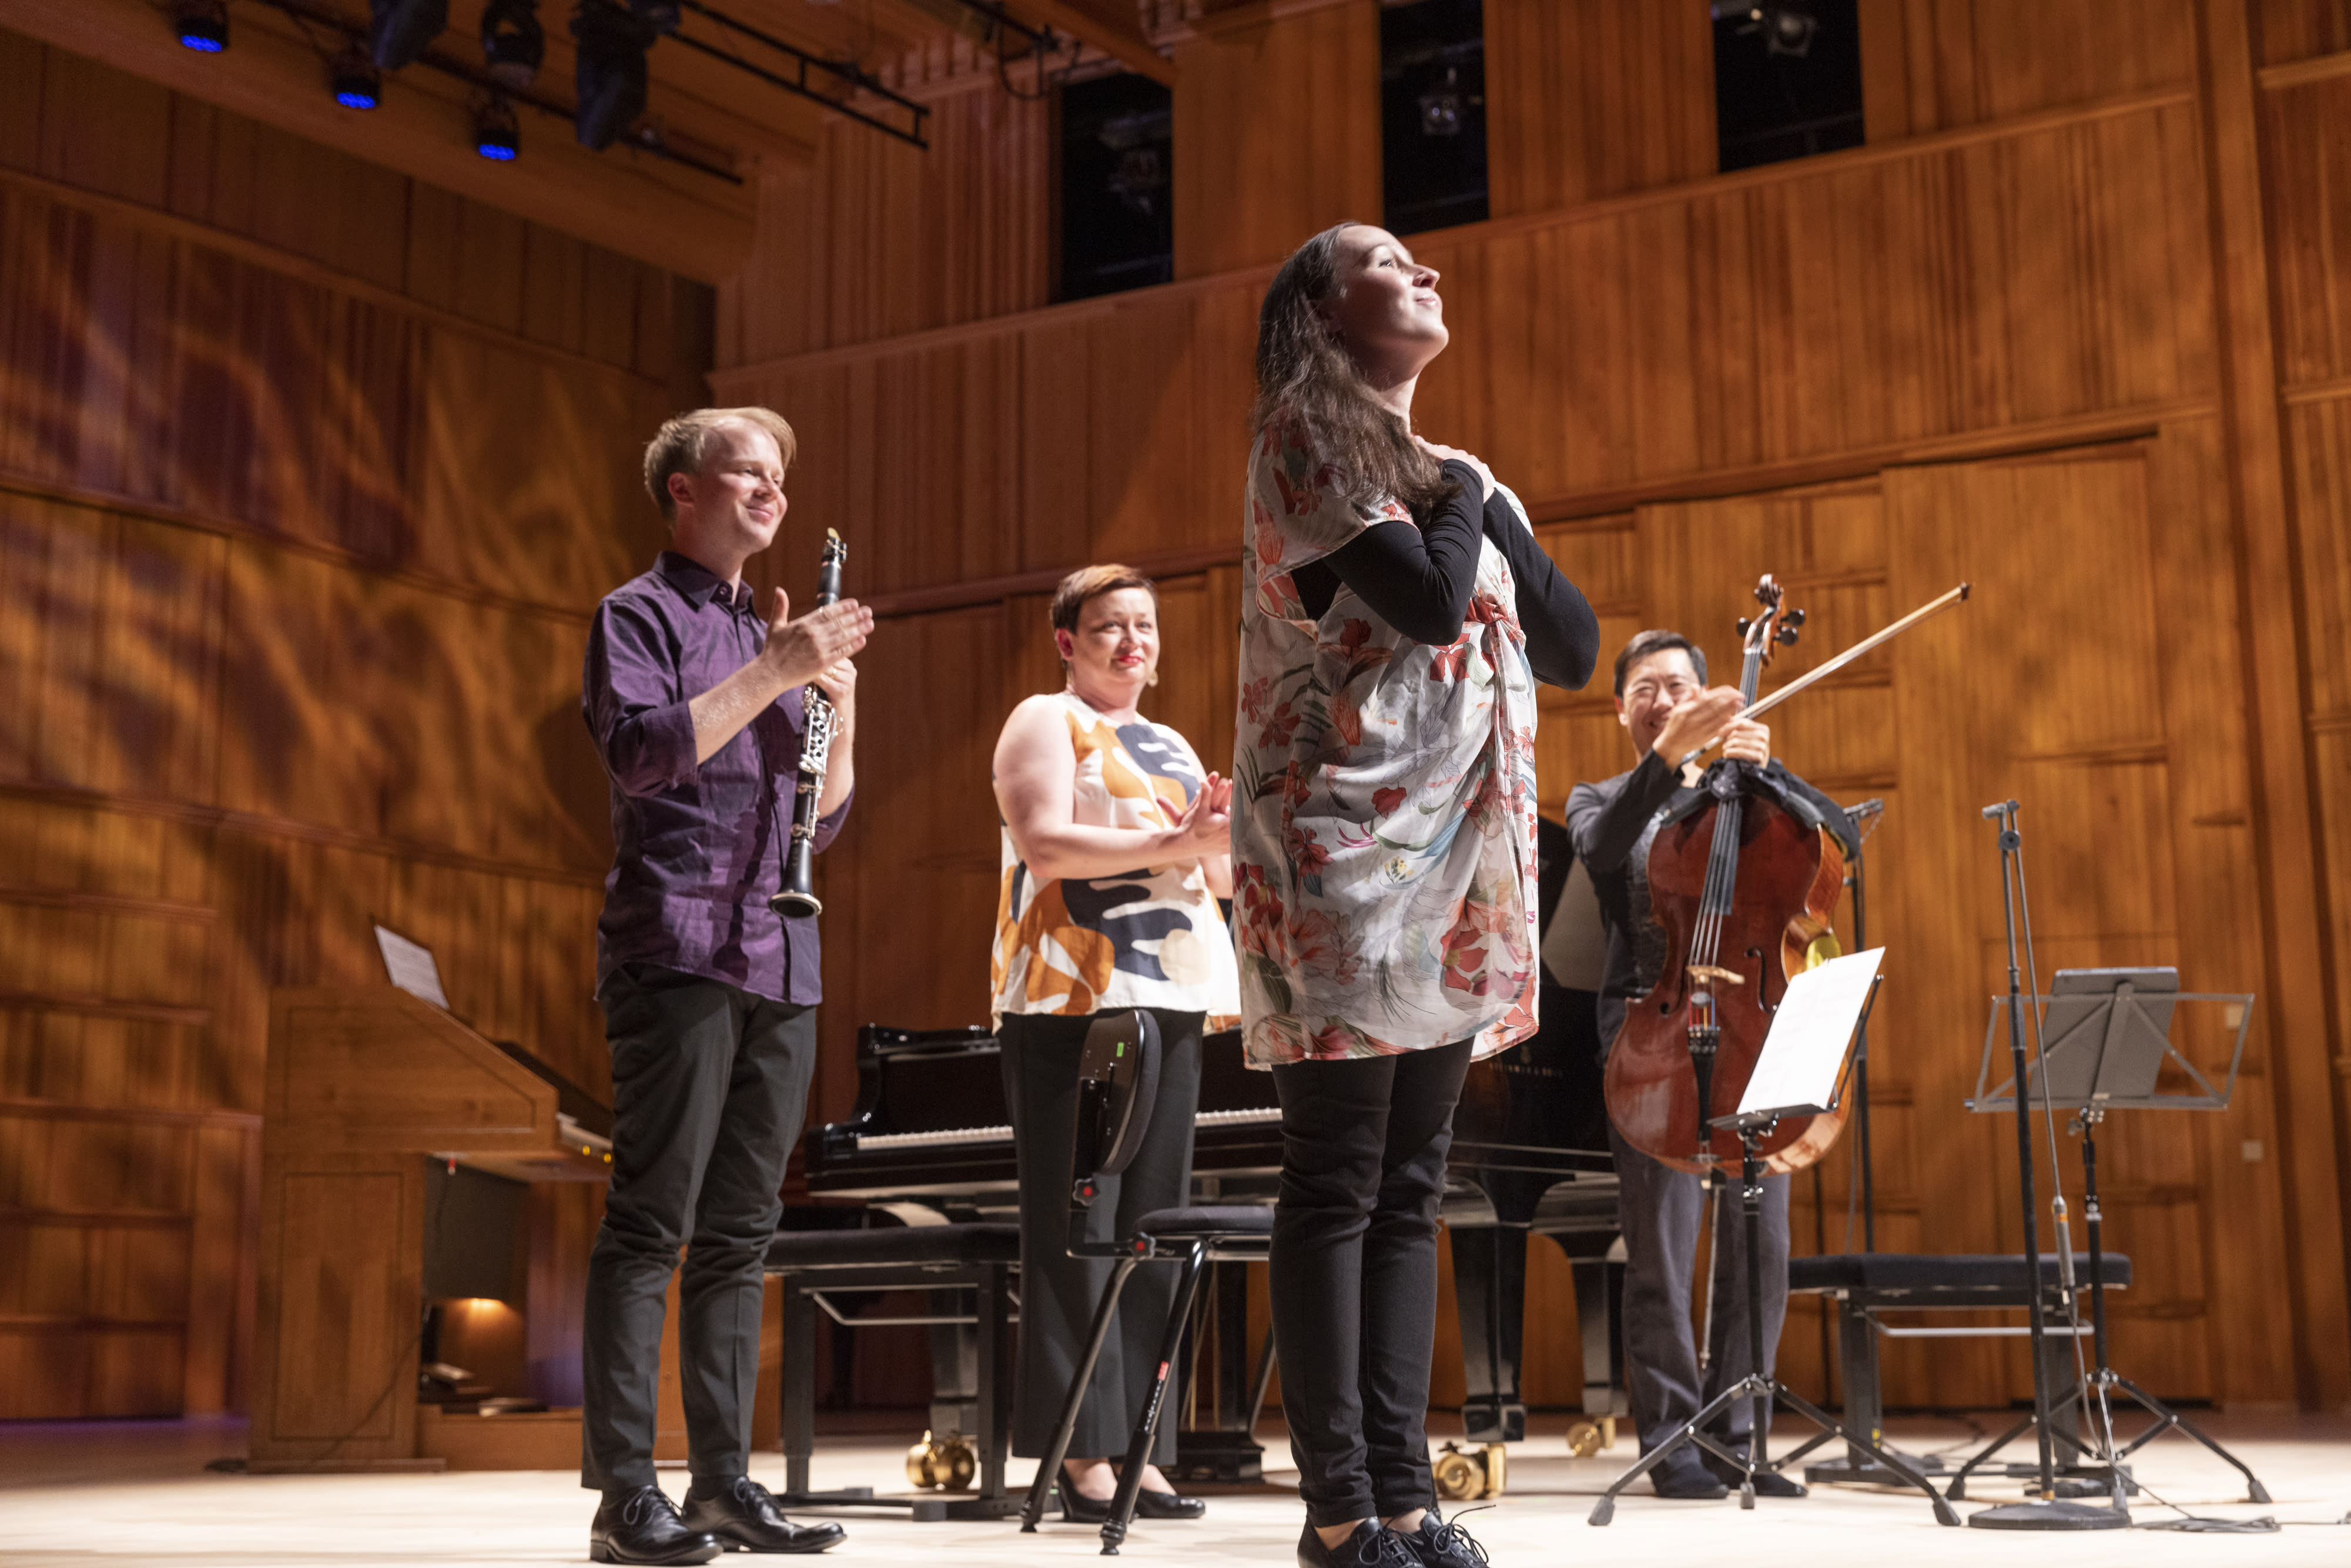 Kuhmo’s chamber music festival made it to the BBC’s classic list